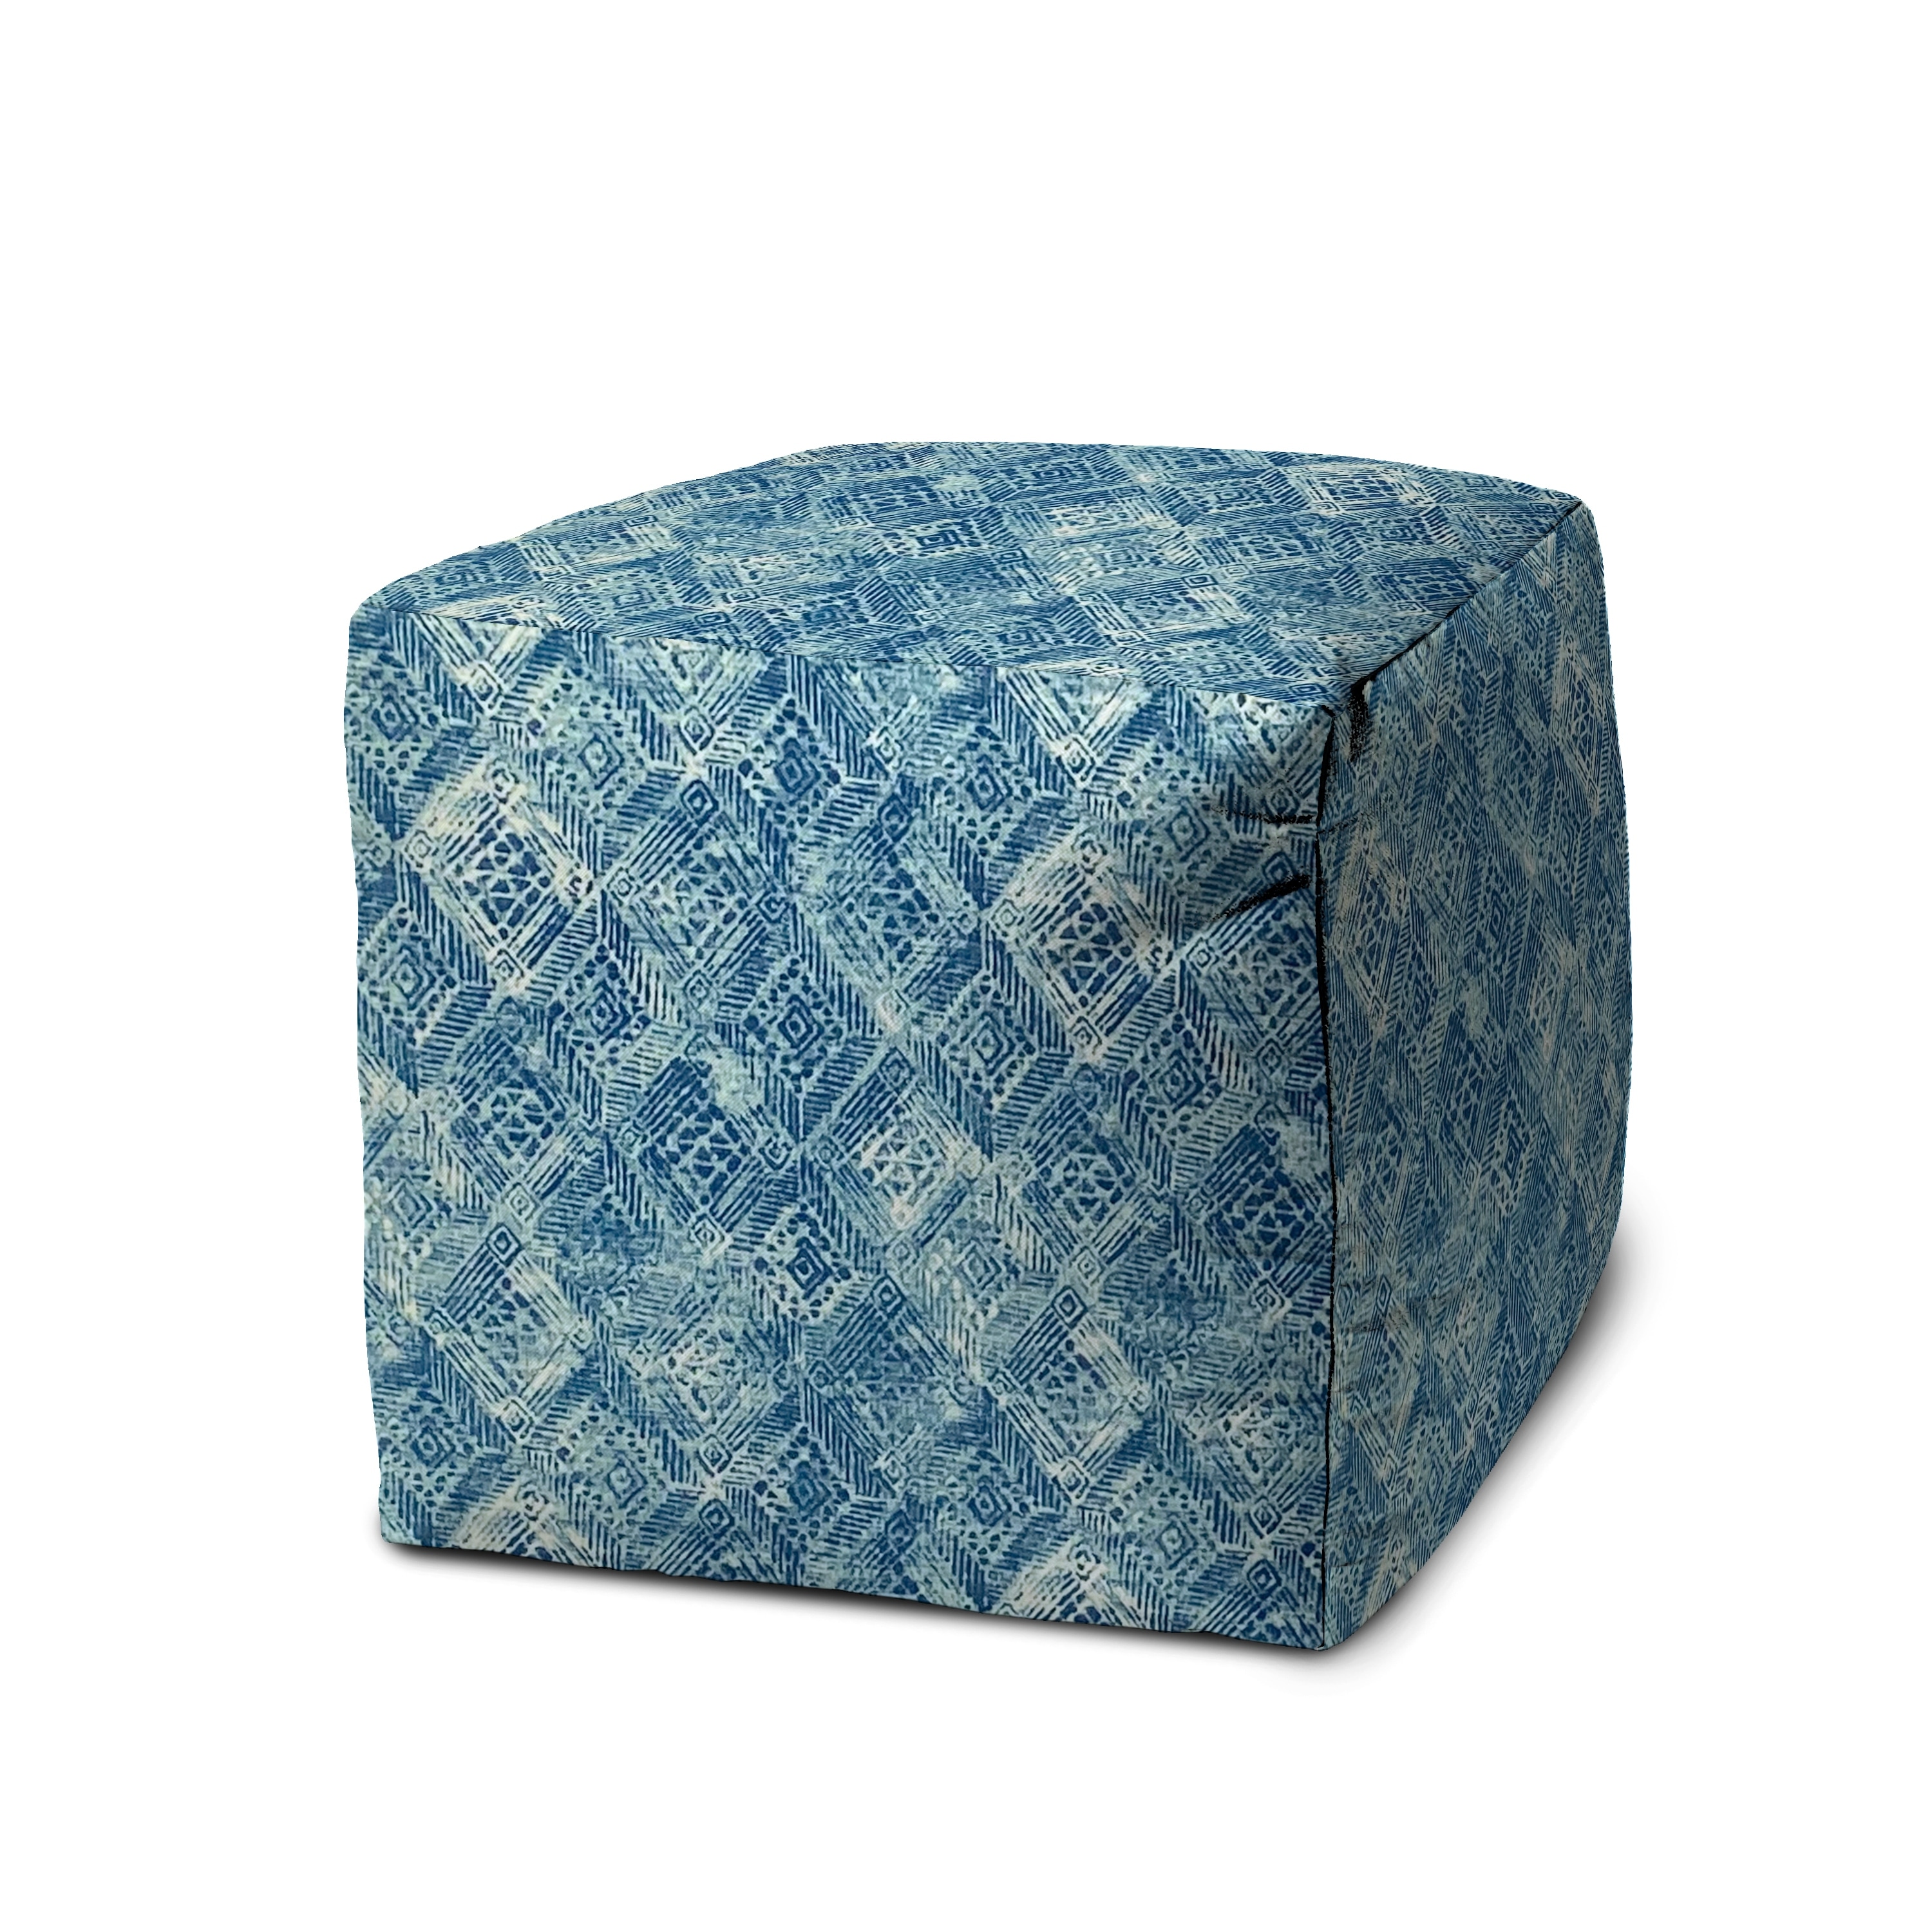 Joita Indoor Outdoor Pouf REMEDIA Zipper Cover with Luxury Polyfil Stuffing  17 x 17 x 17 - On Sale - Bed Bath & Beyond - 35631527